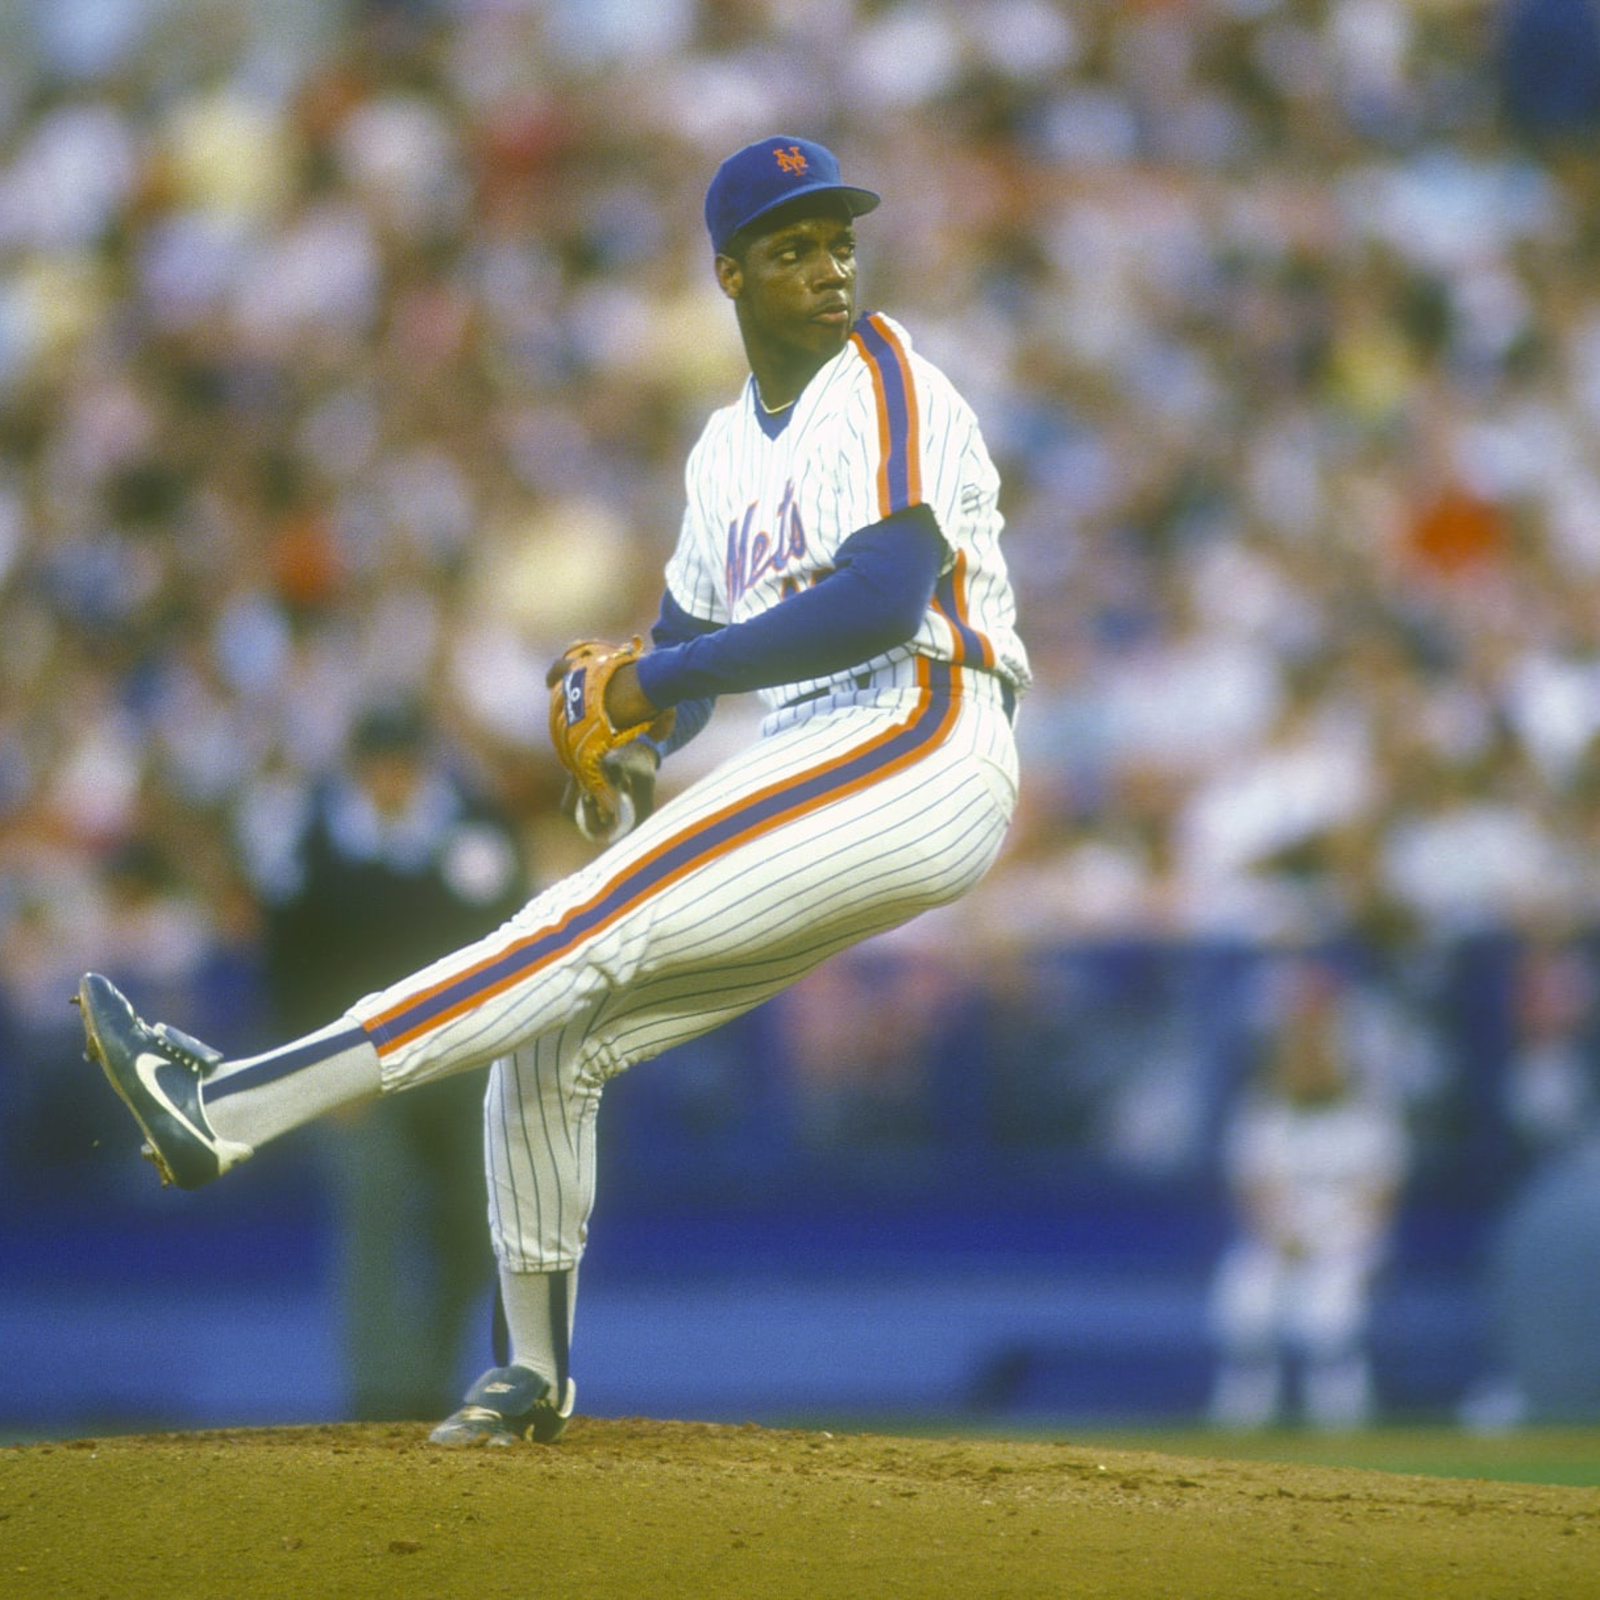 Mets to retire Dwight Gooden's no. 16 and Darryl Strawberry's no. 18 in 2024